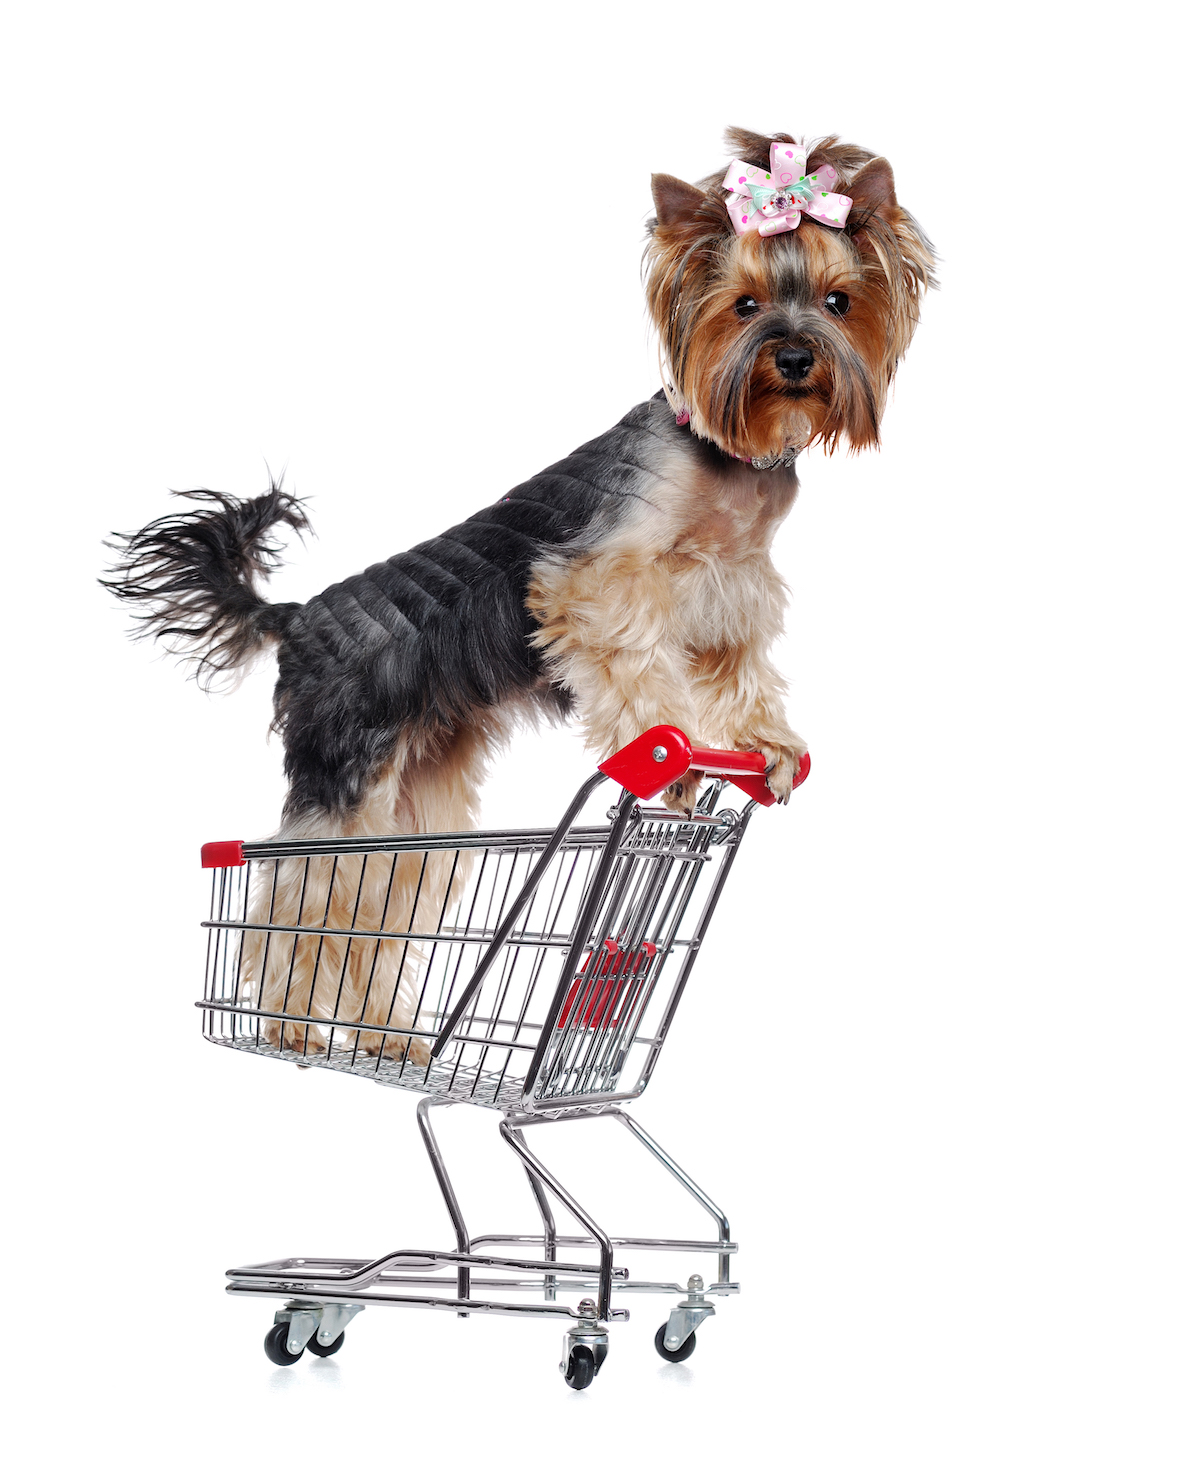 Yorkshire Terrier puppy on hind legs in a shopping trolley